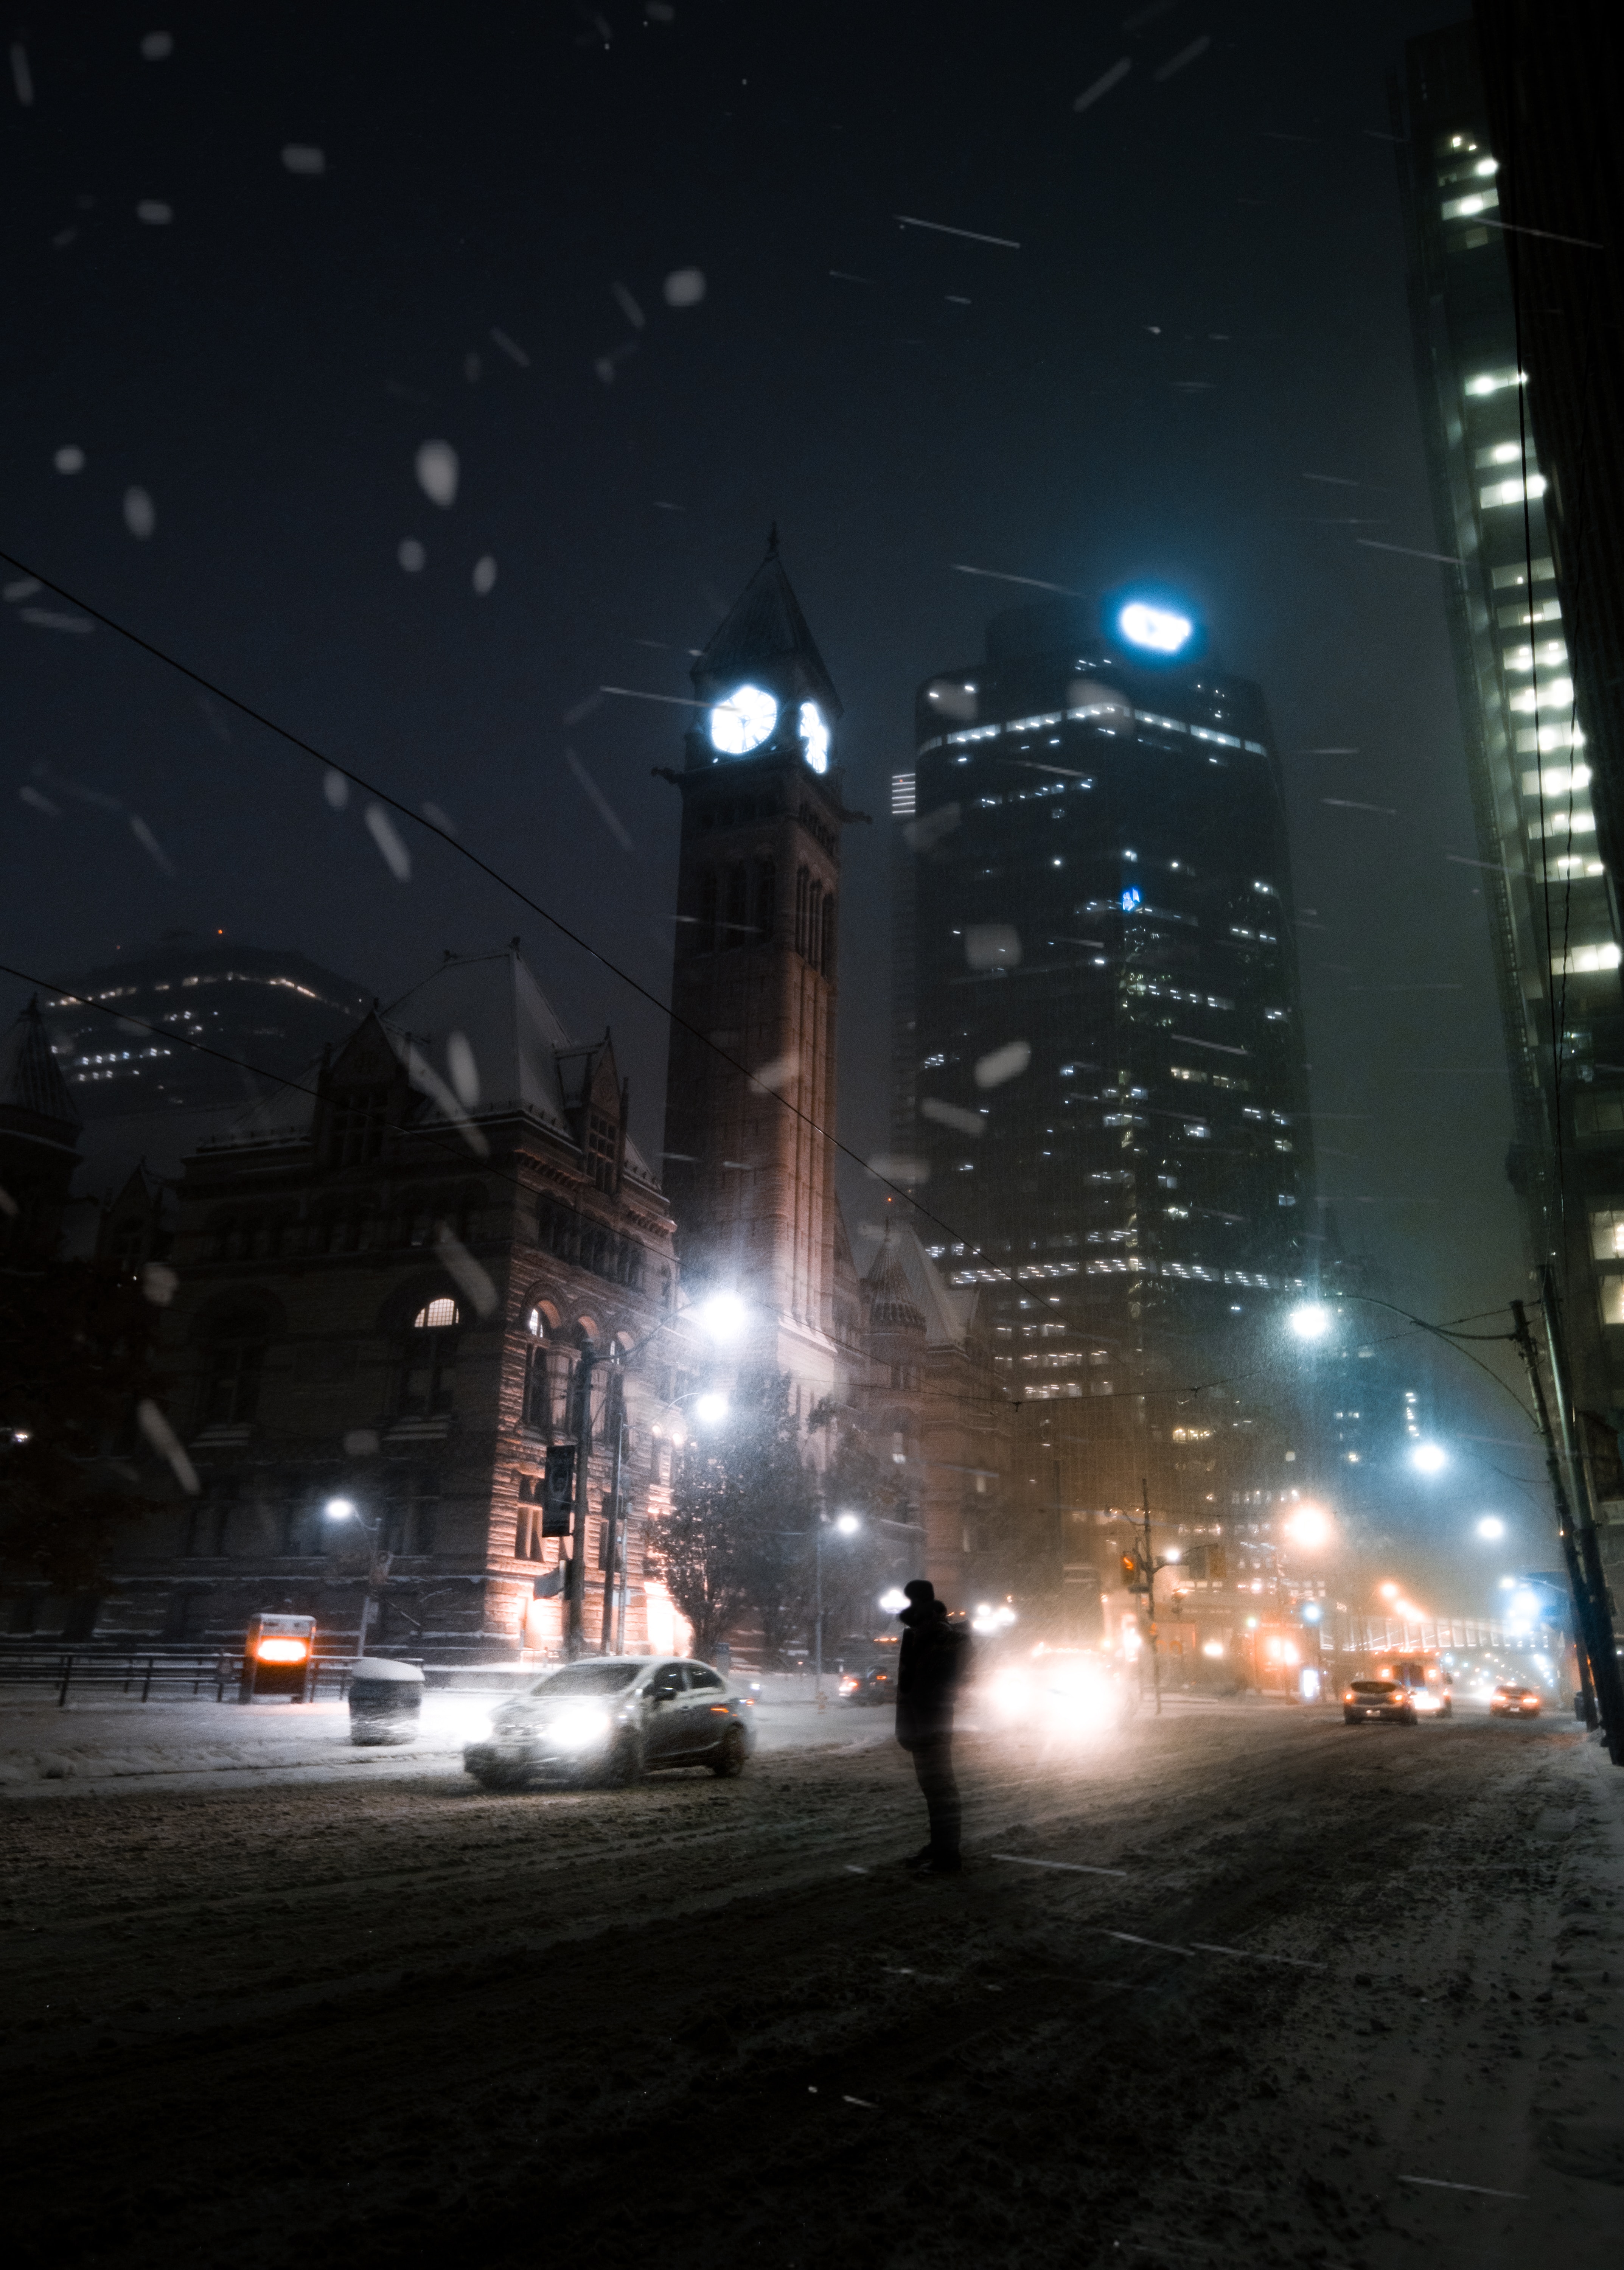 65593 download wallpaper dark, silhouette, night city, city lights, street, snowfall screensavers and pictures for free